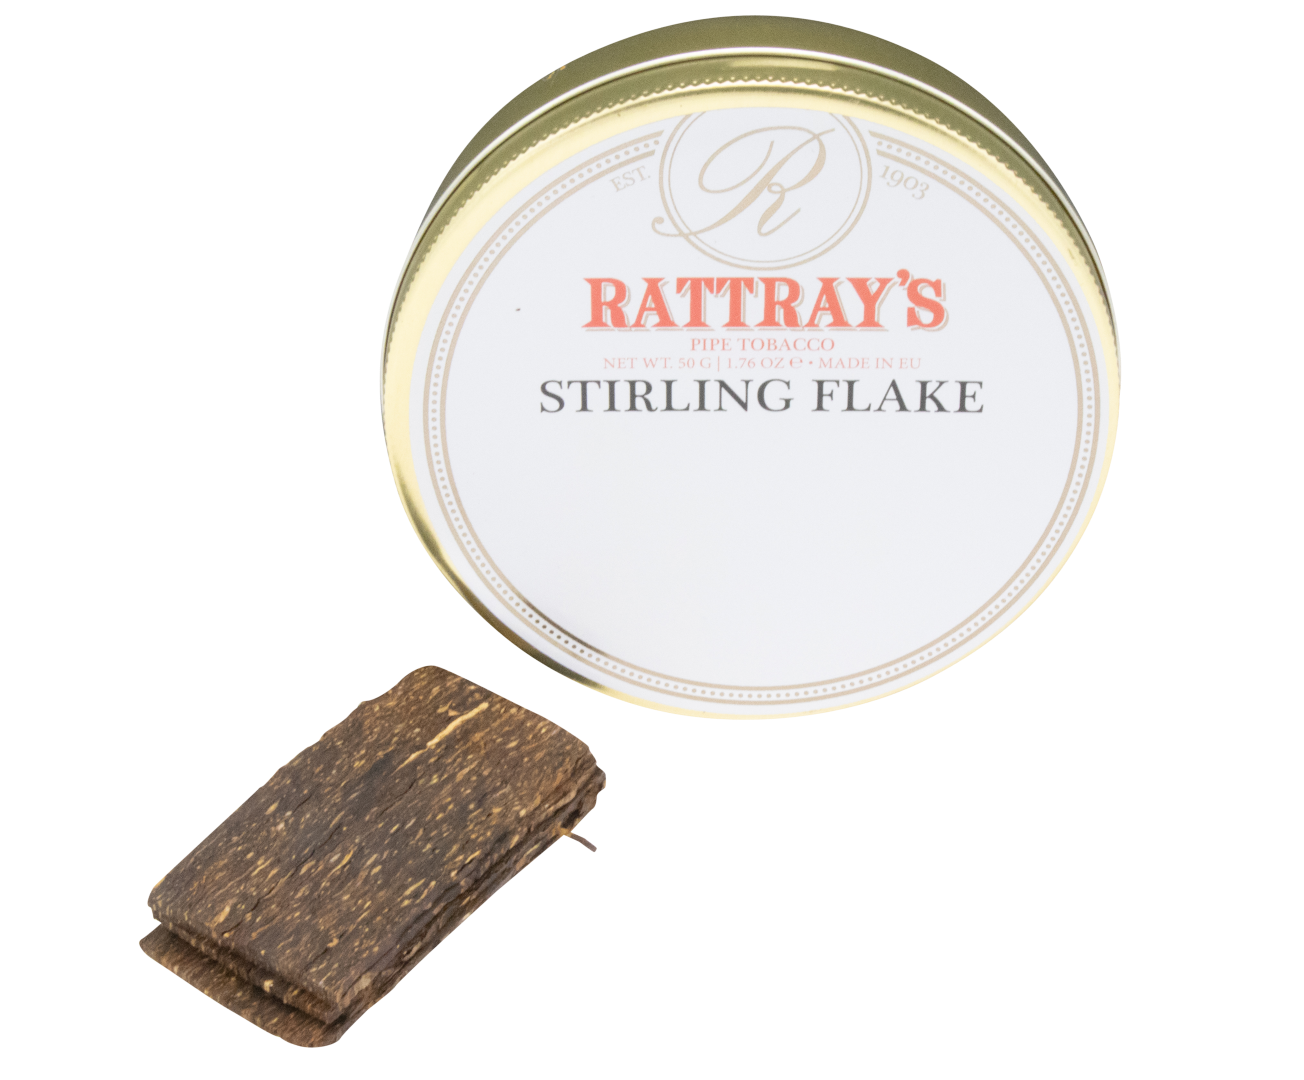 Rattray's Stirling Flake Pipe Tobacco